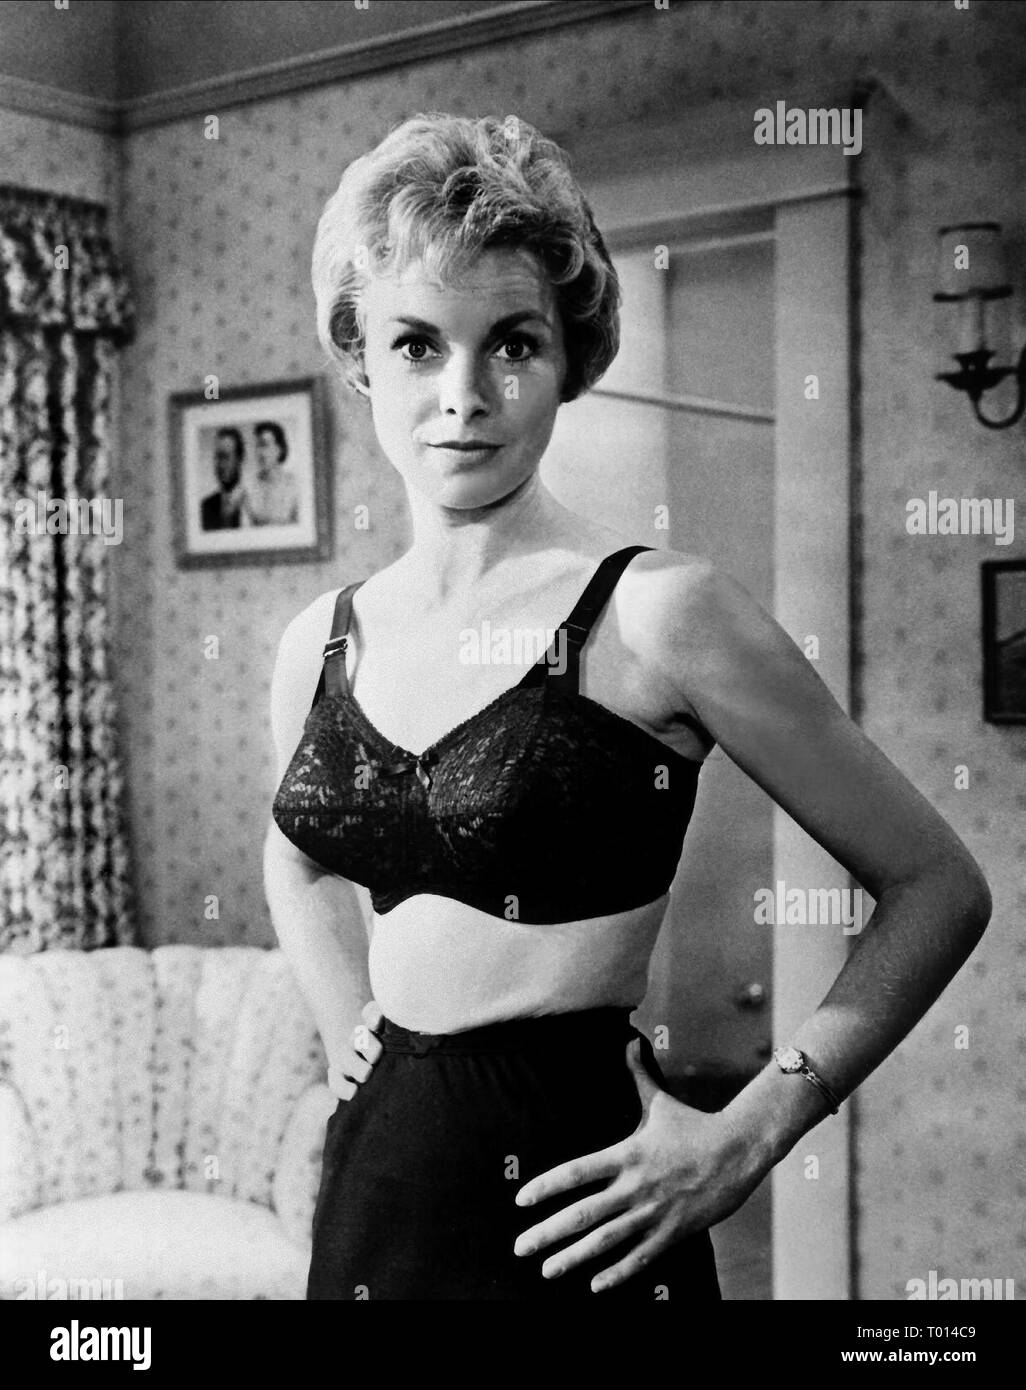 Images janet leigh 44 Beautiful